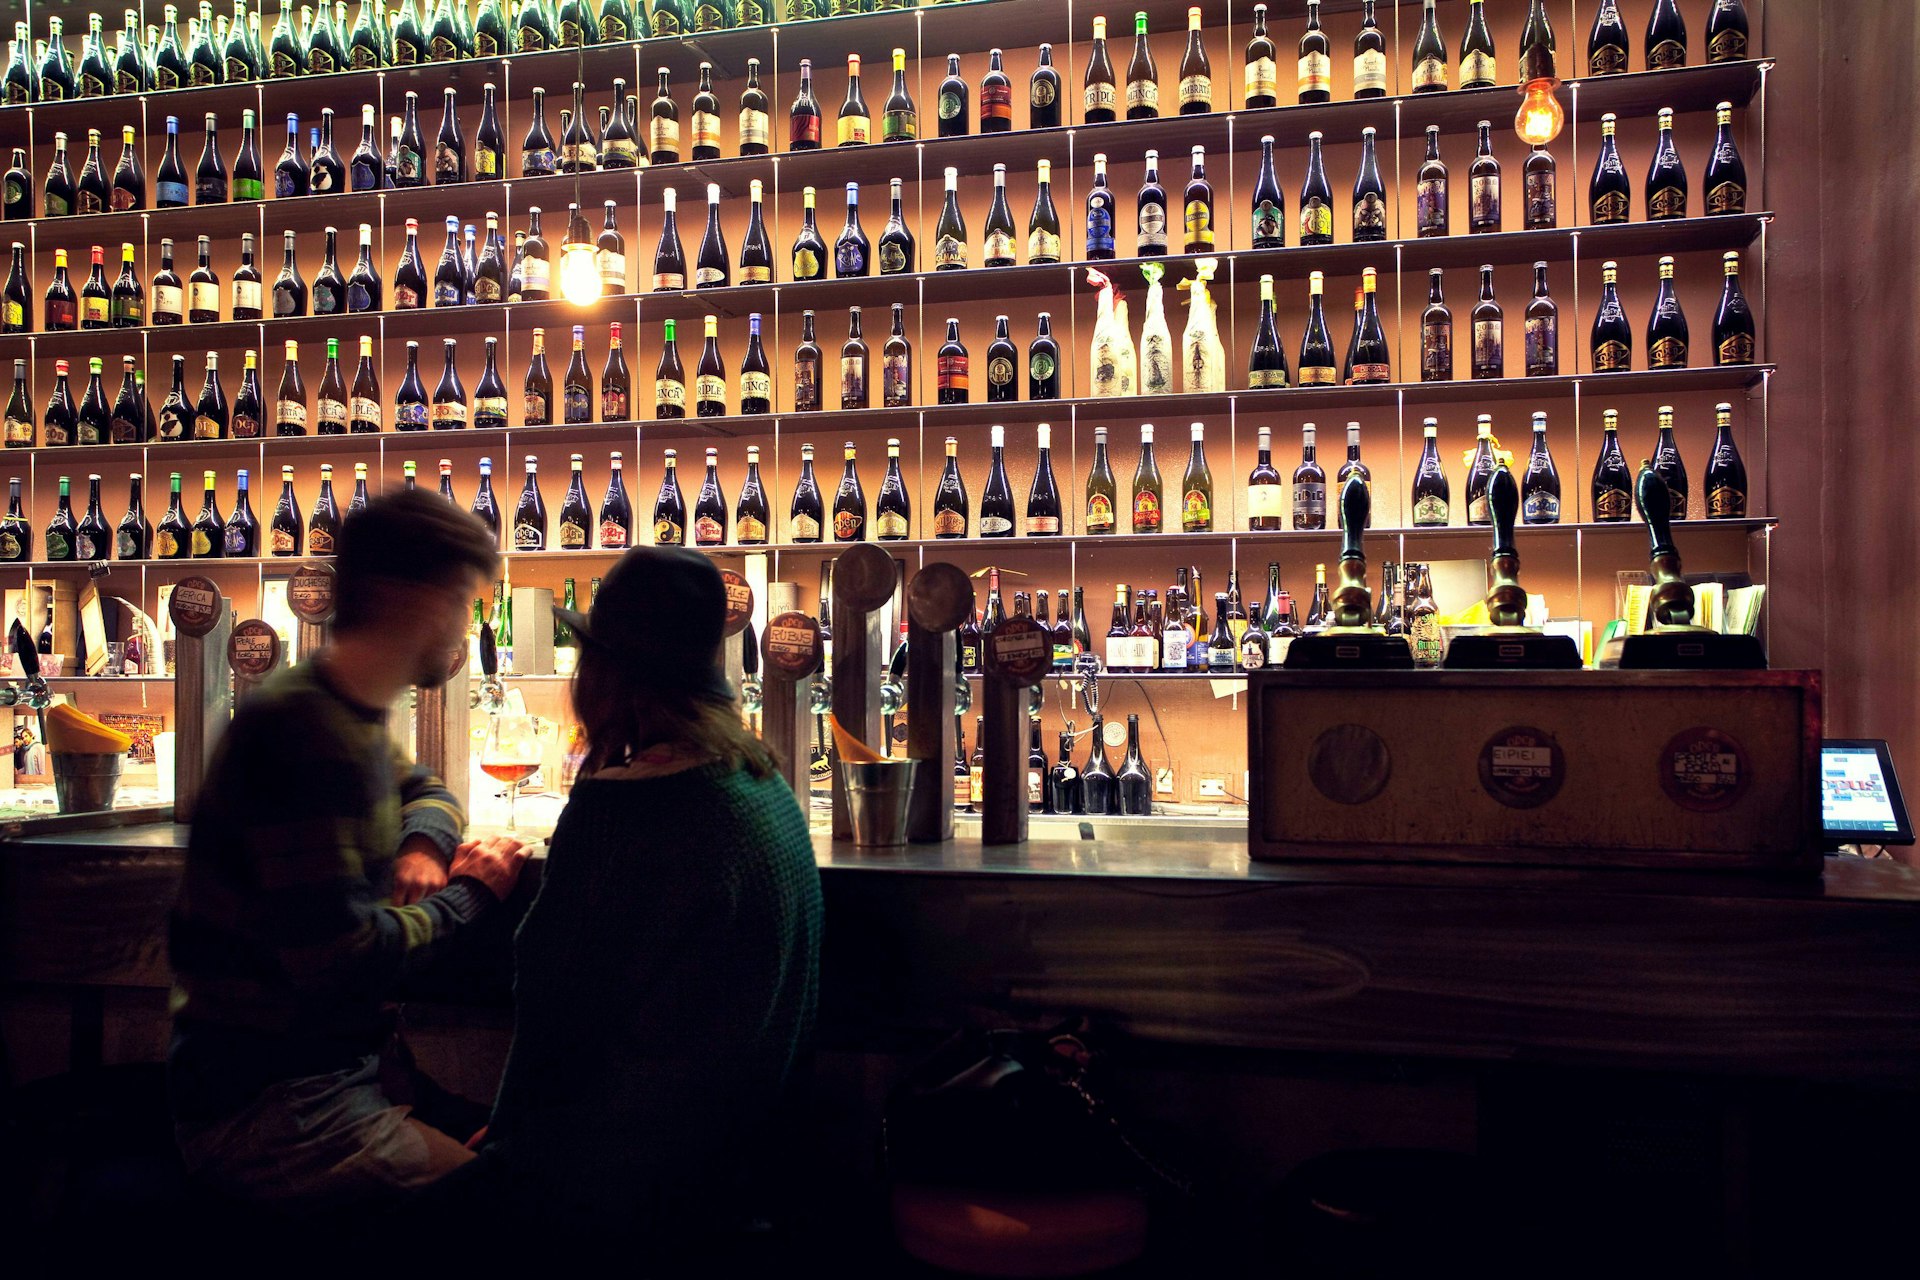 Two people sit at a bar that's backed by hundreds of wine bottles